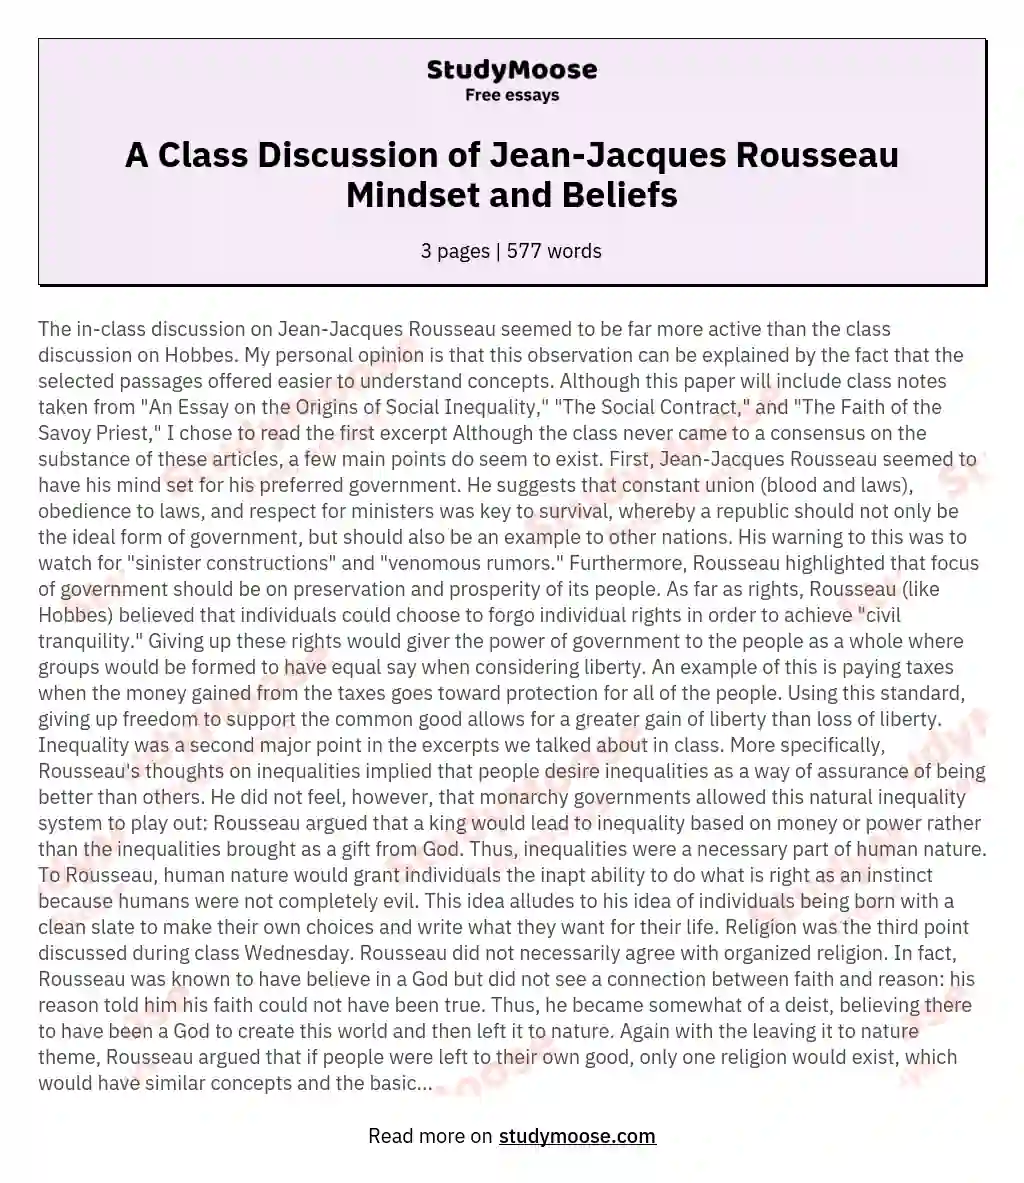 A Class Discussion of Jean-Jacques Rousseau Mindset and Beliefs essay